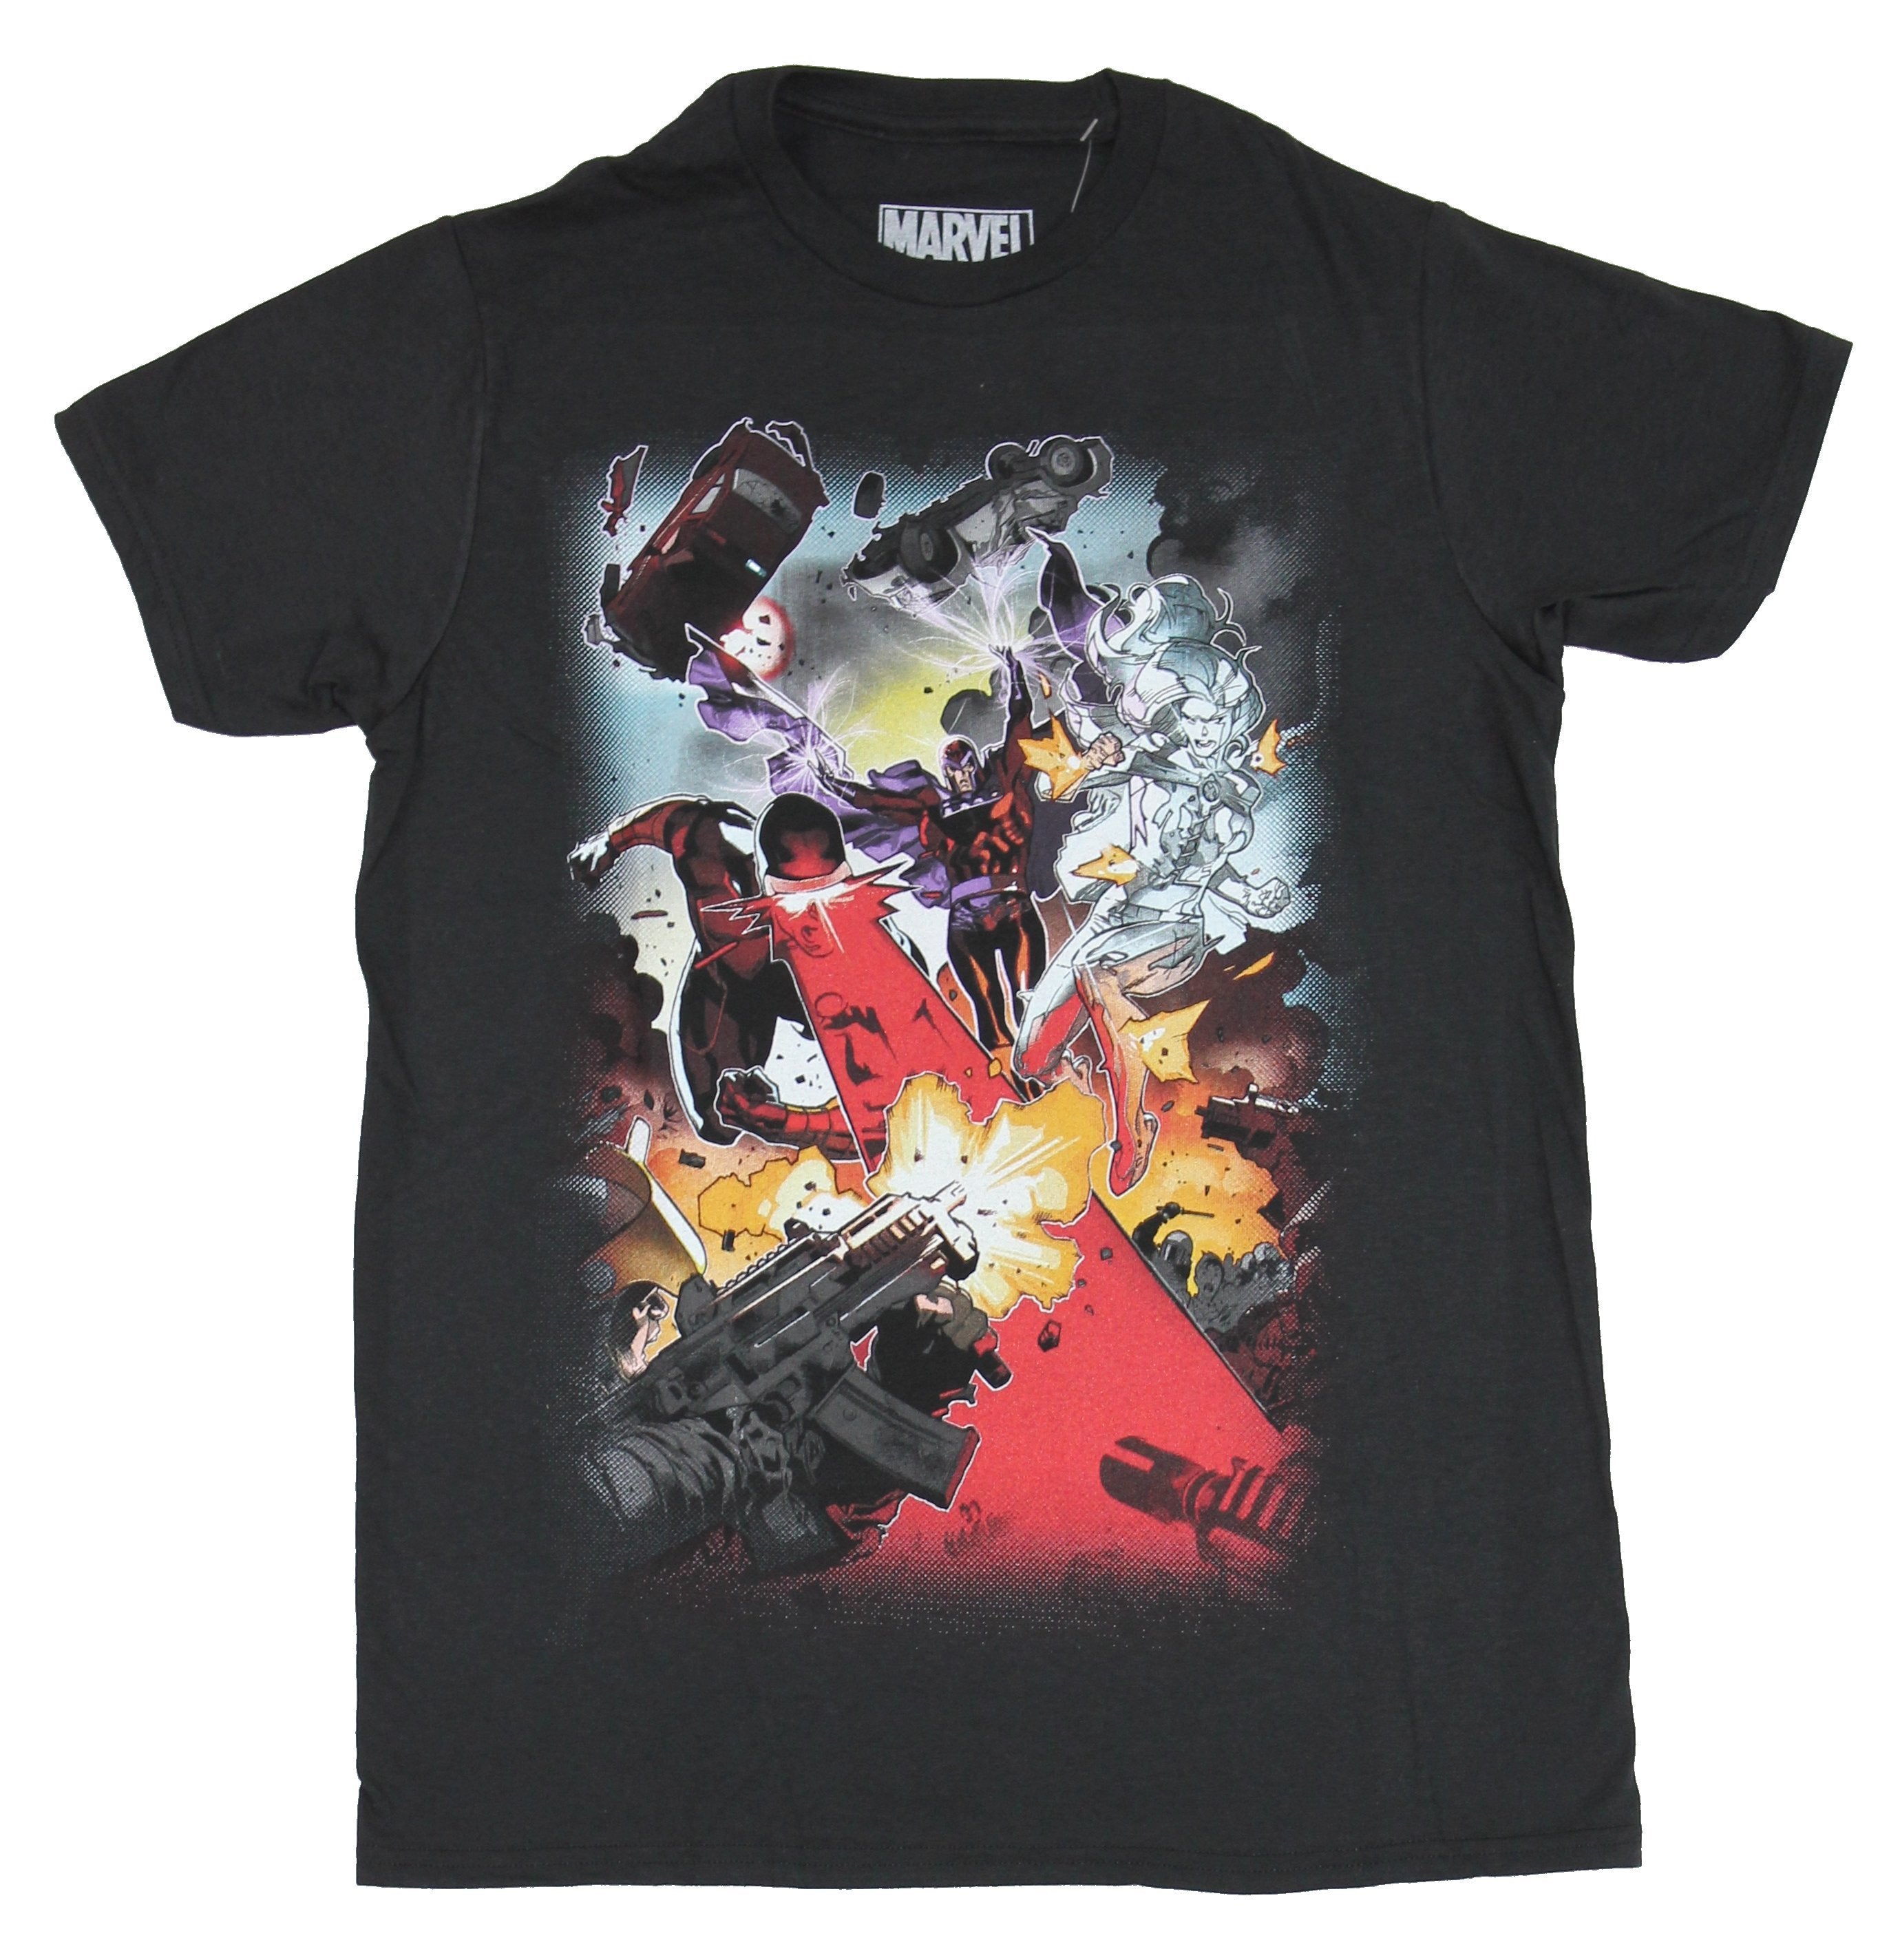 X-Men (Marvel Comics) Mens T-Shirt - Magneto White Queen Cyclops Attacking Together